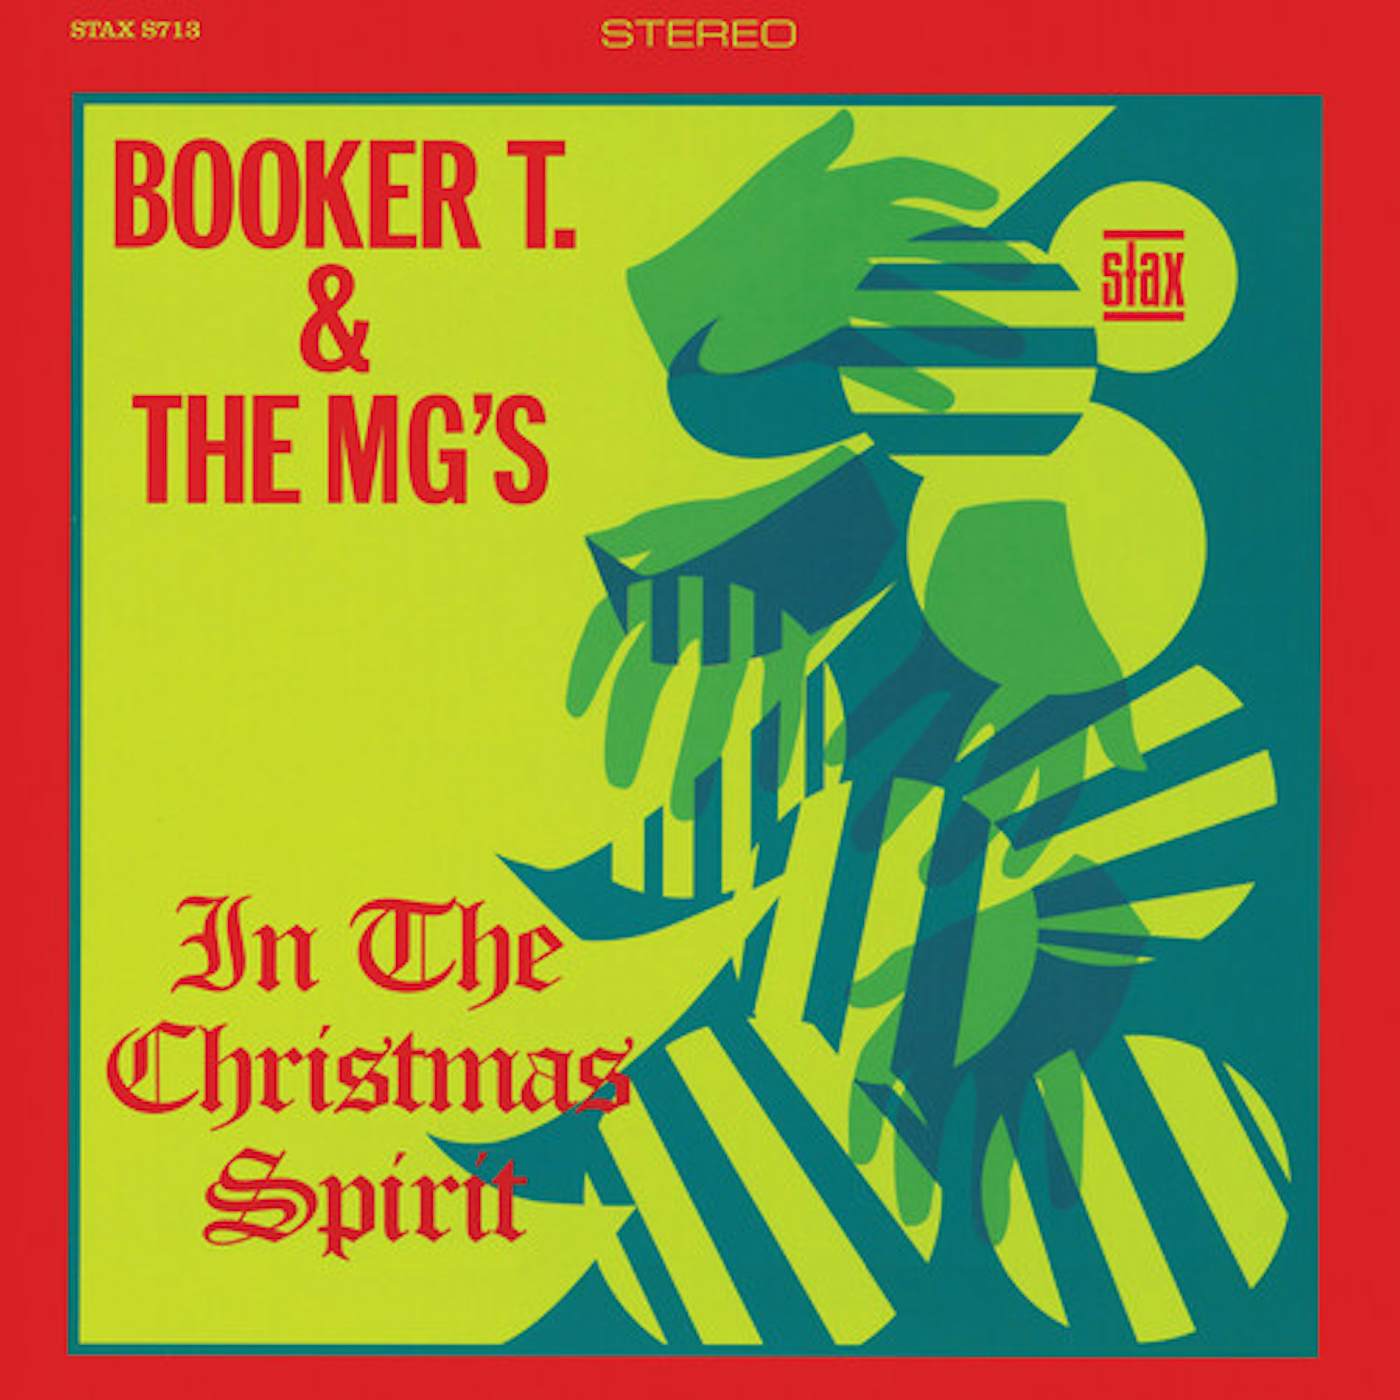 Booker T. & the M.G.'s In The Christmas Spirit (ATL75/Clear) Vinyl Record